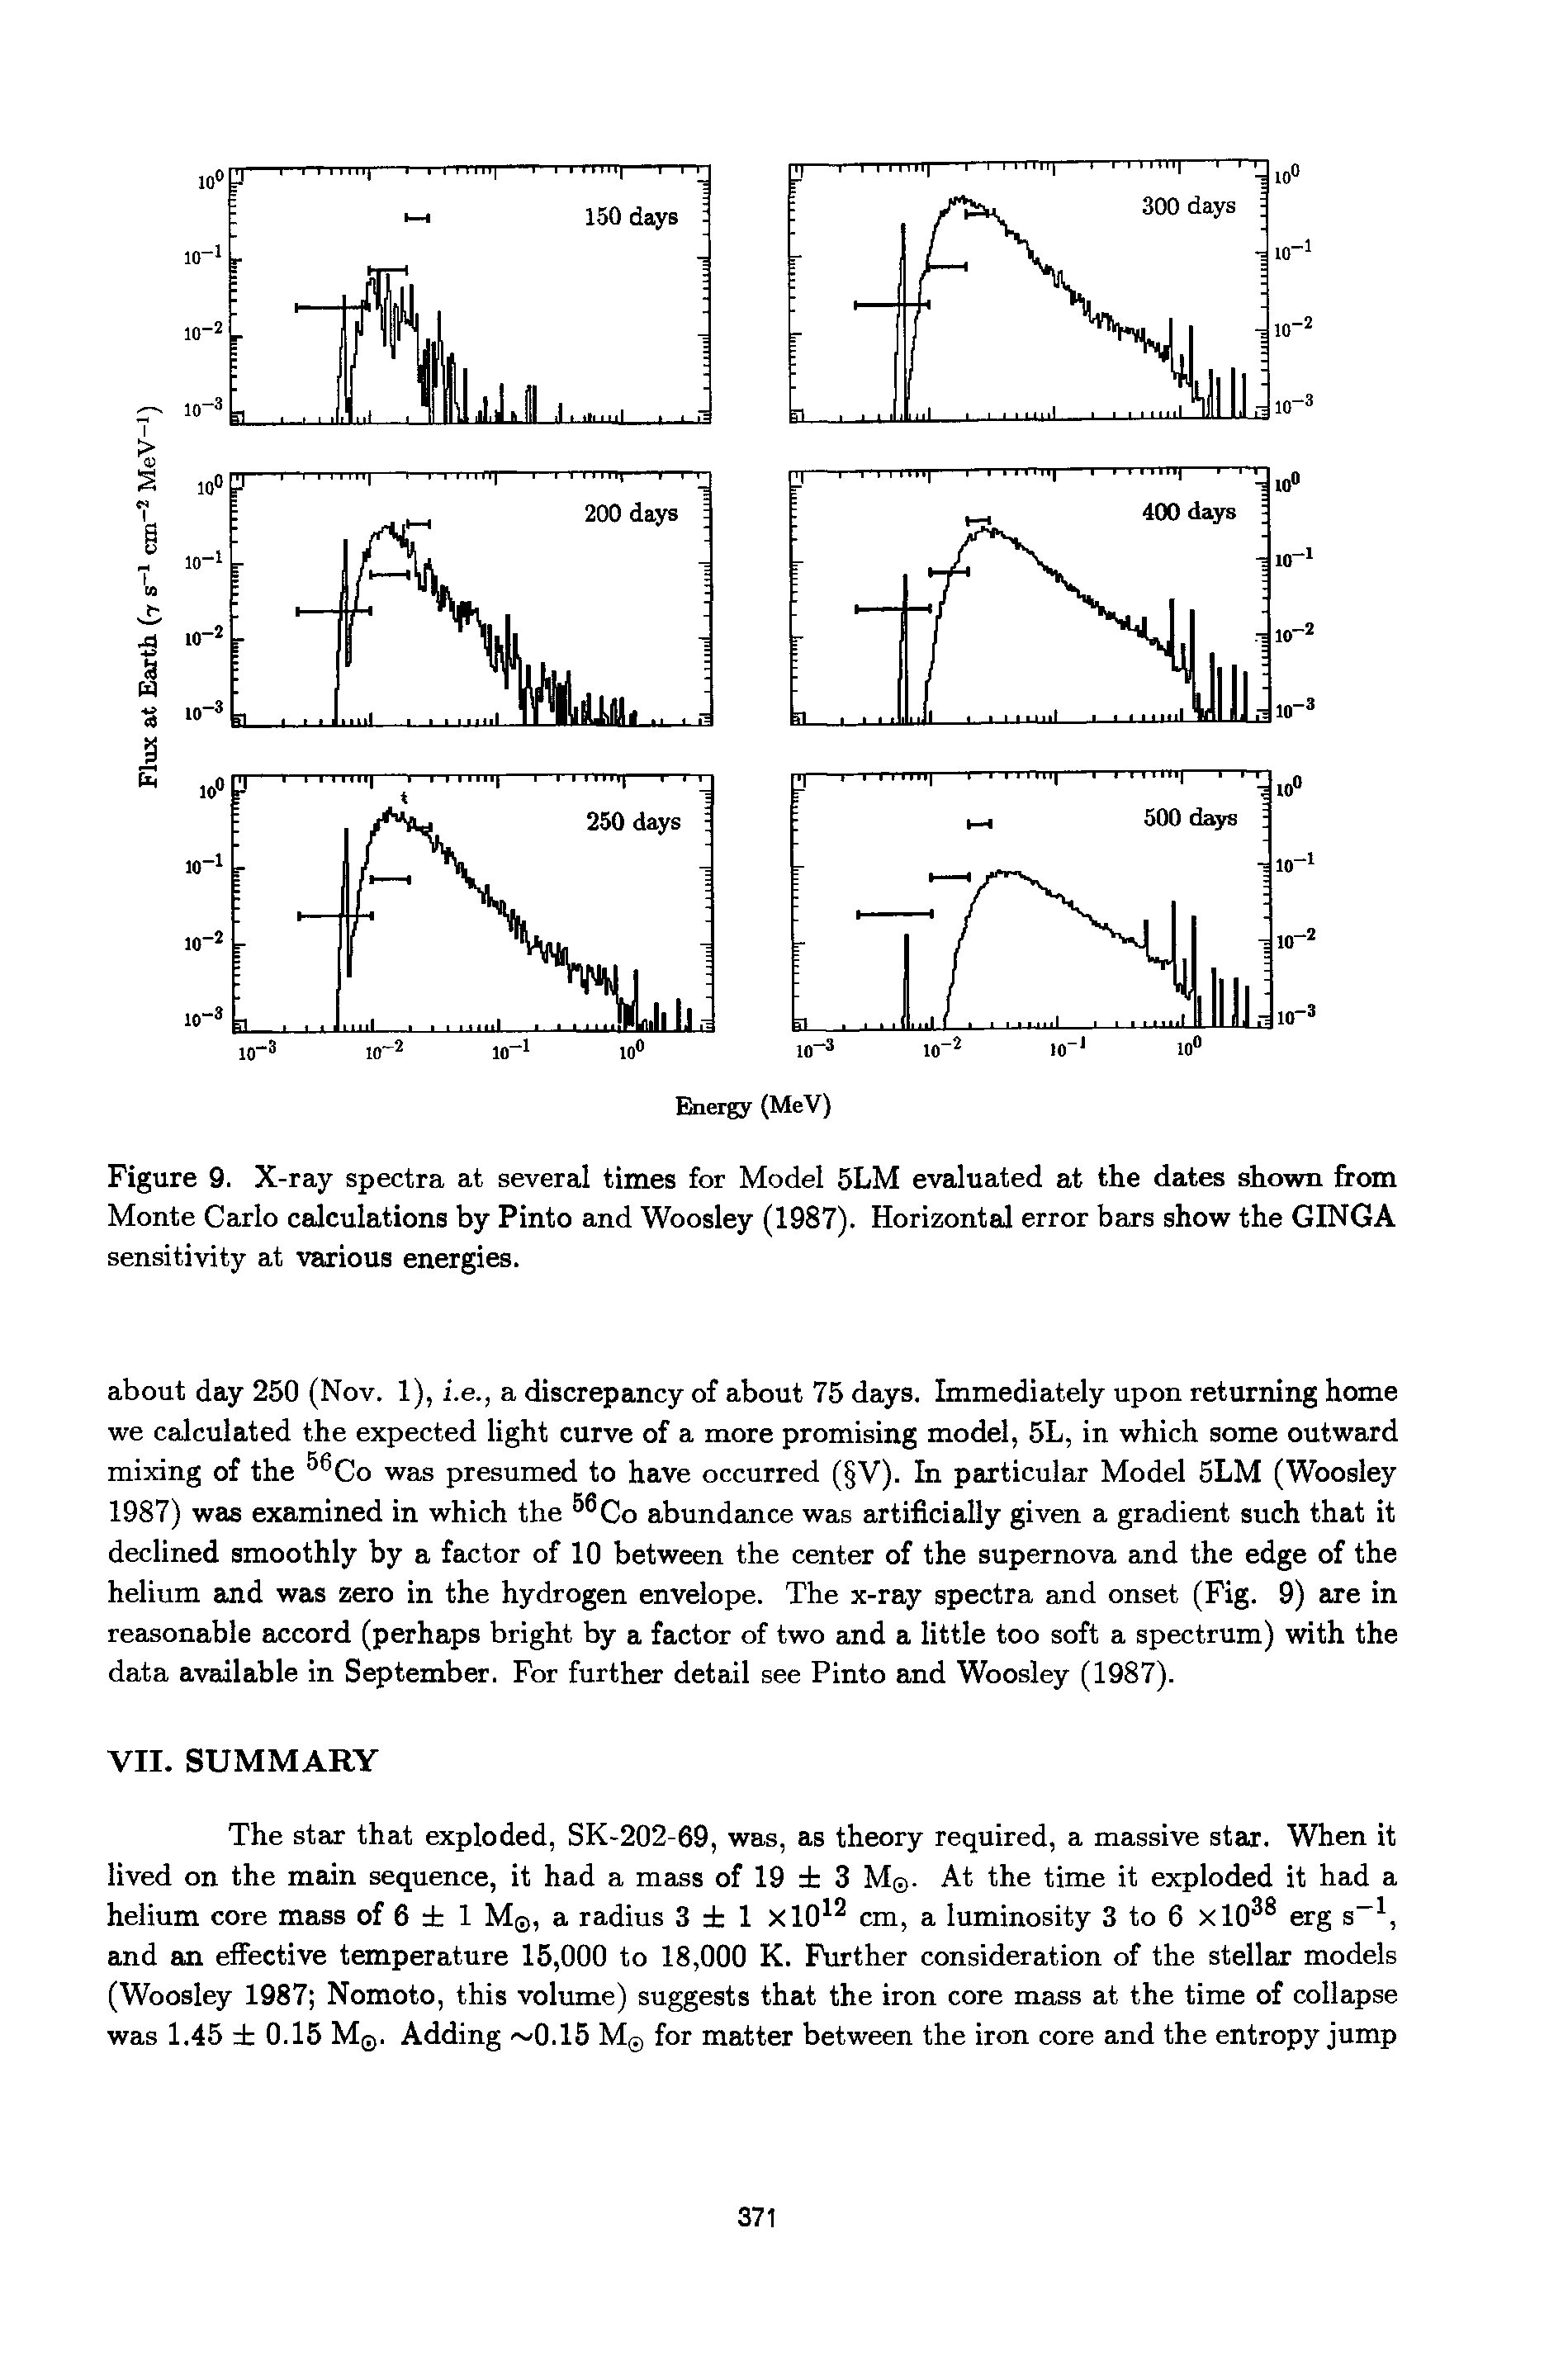 Figure 9. X-ray spectra at several times for Model 5LM evaluated at the dates shown from Monte Carlo calculations by Pinto and Woosley (1987). Horizontal error bars show the GINGA sensitivity at various energies.